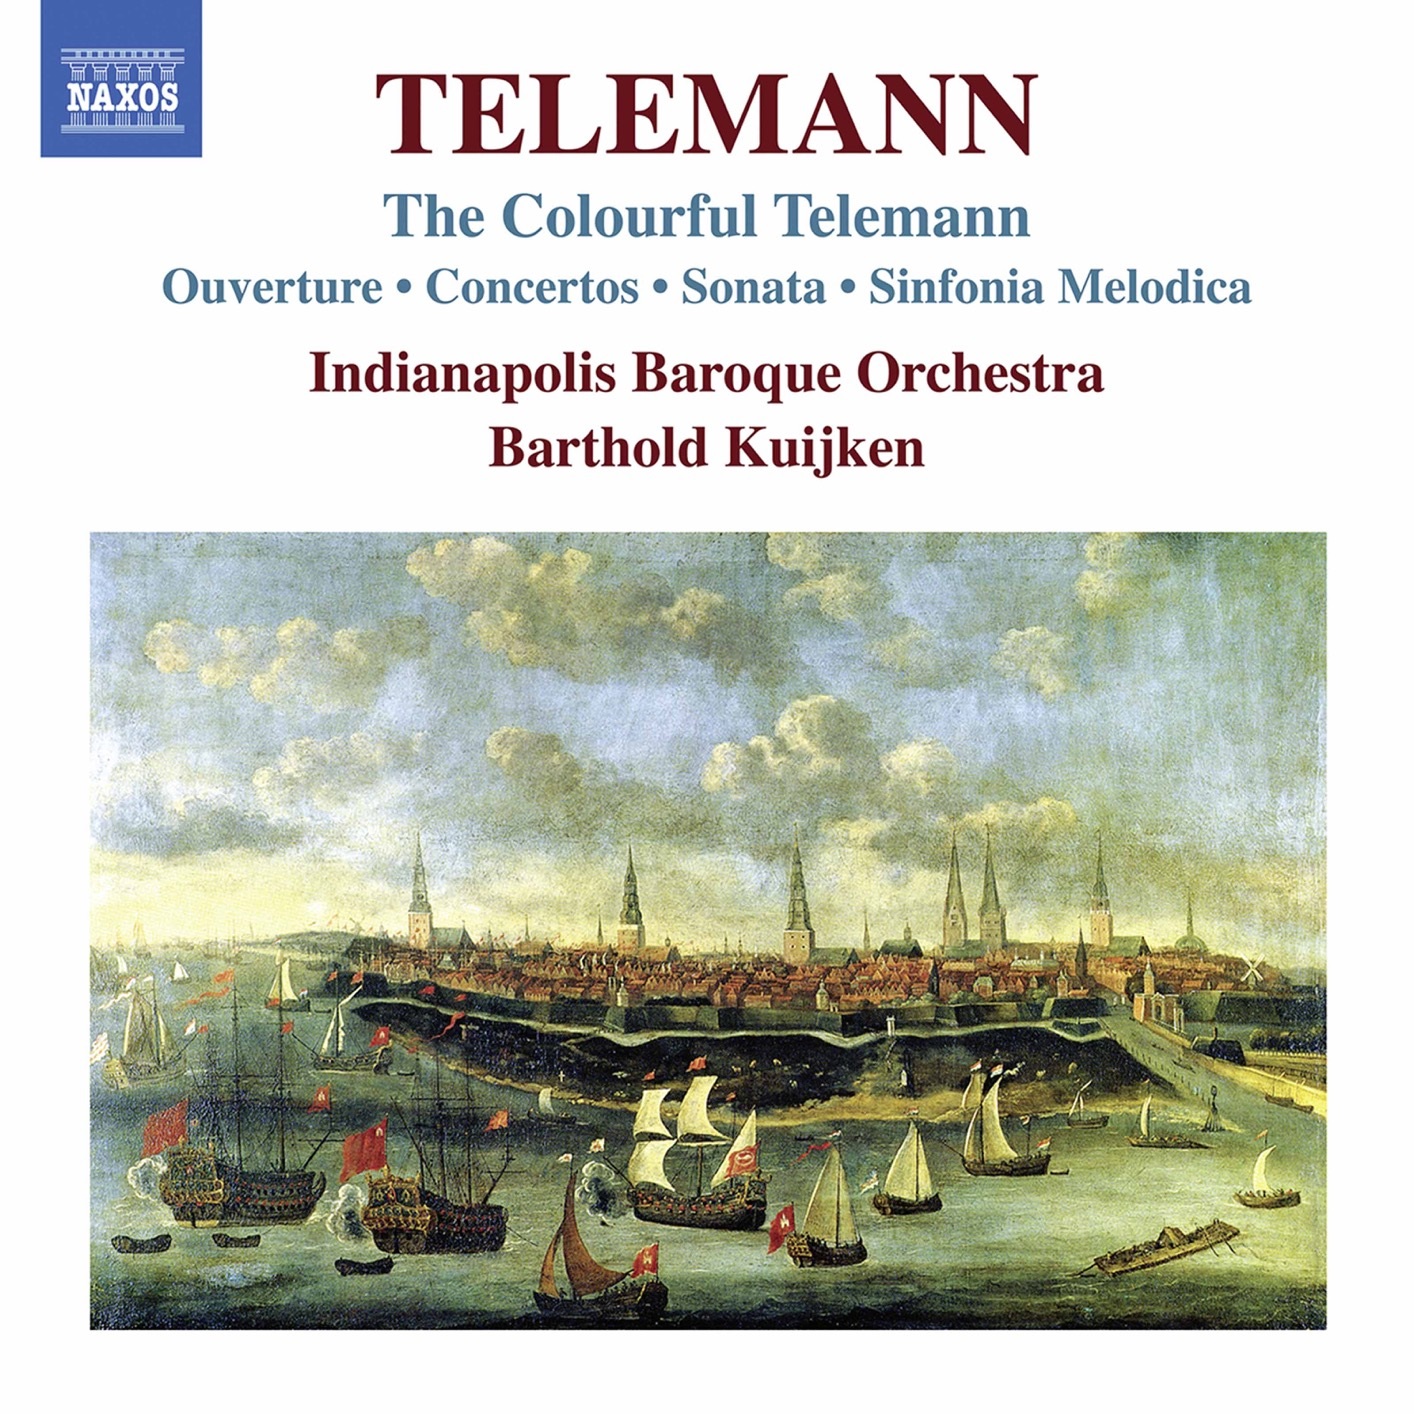 Indianapolis Baroque Orchestra & Barthold Kuijken - The Colorful Telemann (2020) [FLAC 24bit/96kHz]